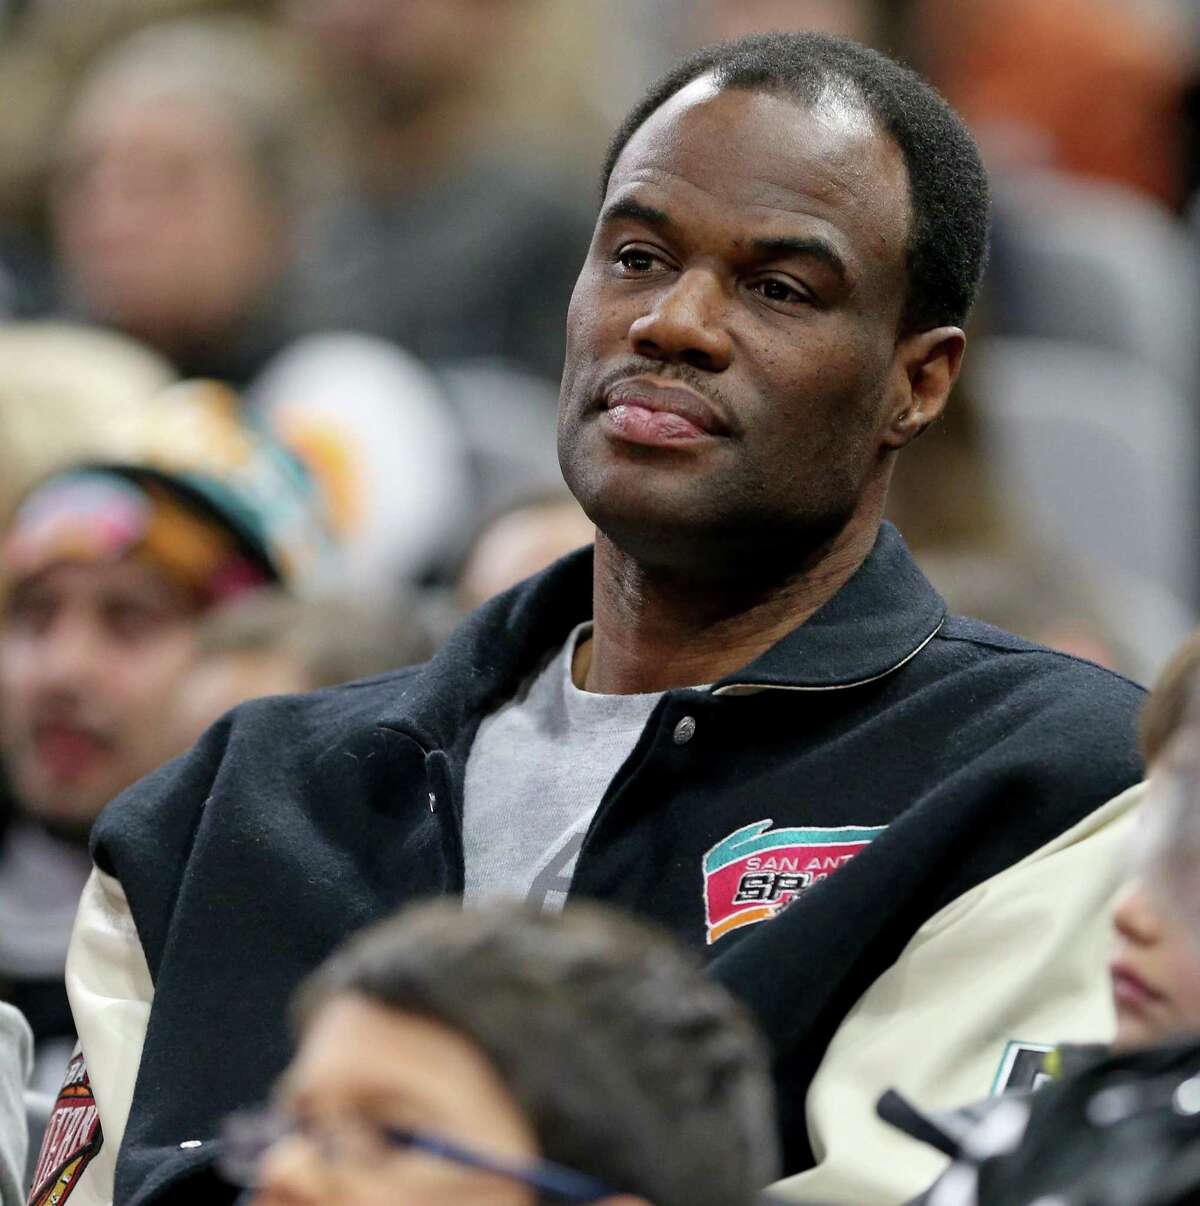 Former San Antonio Spurs player David Robinson watches action against the Charlotte Hornets Saturday Jan. 7, 2017 at the AT&T Center.